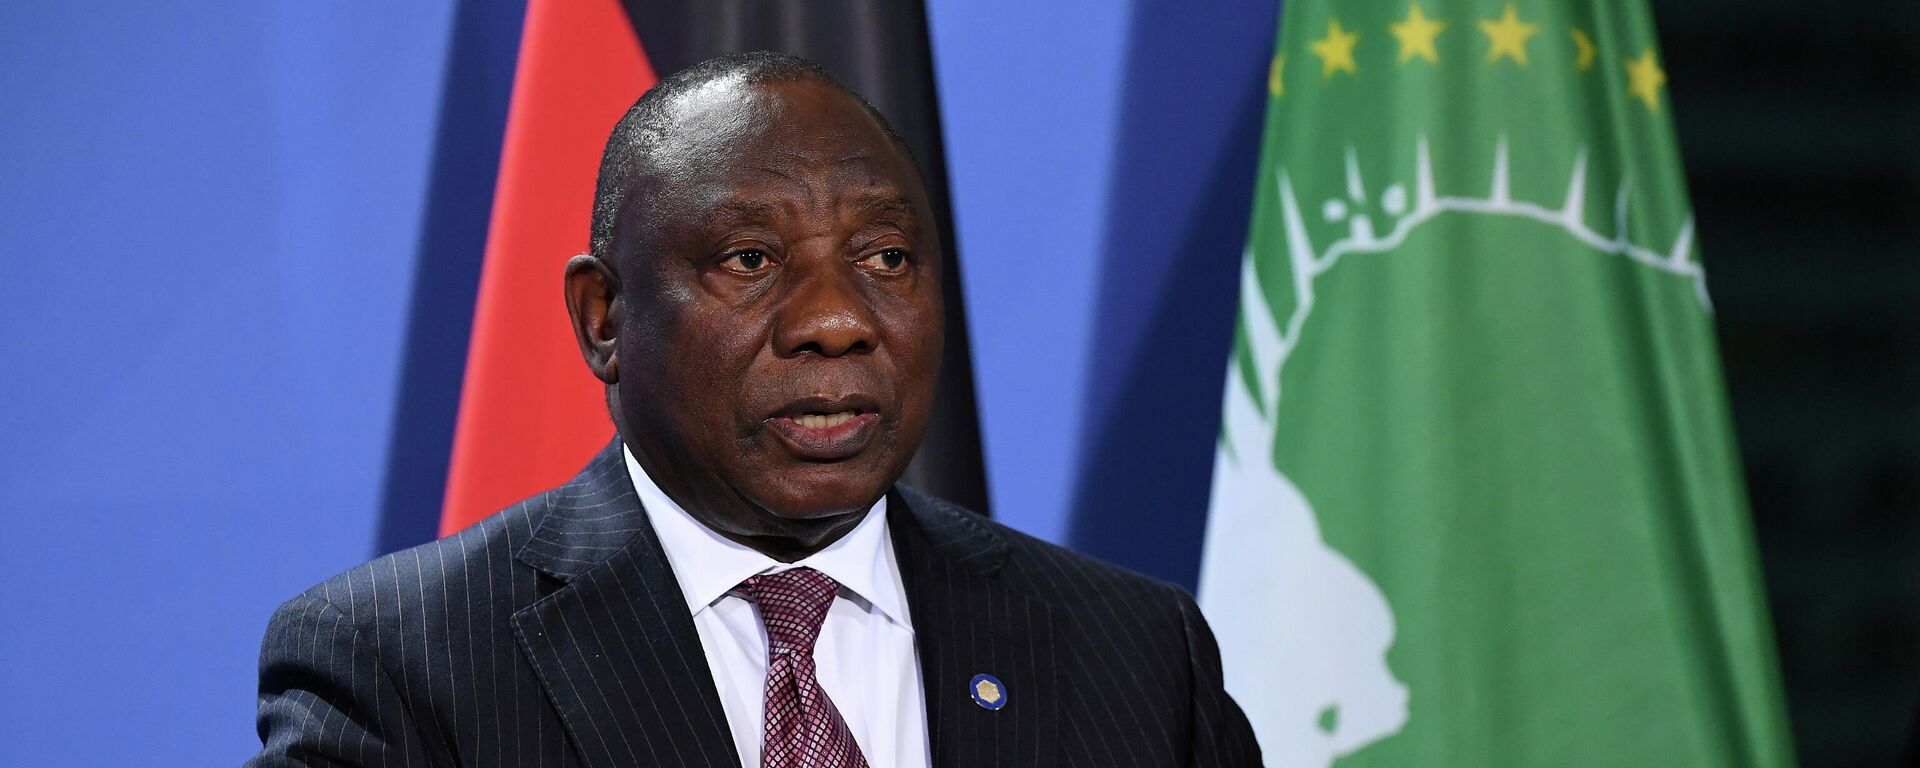 FILE PHOTO: South African President Cyril Ramaphosa addresses a press conference after the G20 Compact with Africa conference at the Chancellery in Berlin, Germany August 27, 2021. Tobias Schwarz/Pool via REUTERS/File Photo - Sputnik International, 1920, 28.11.2021